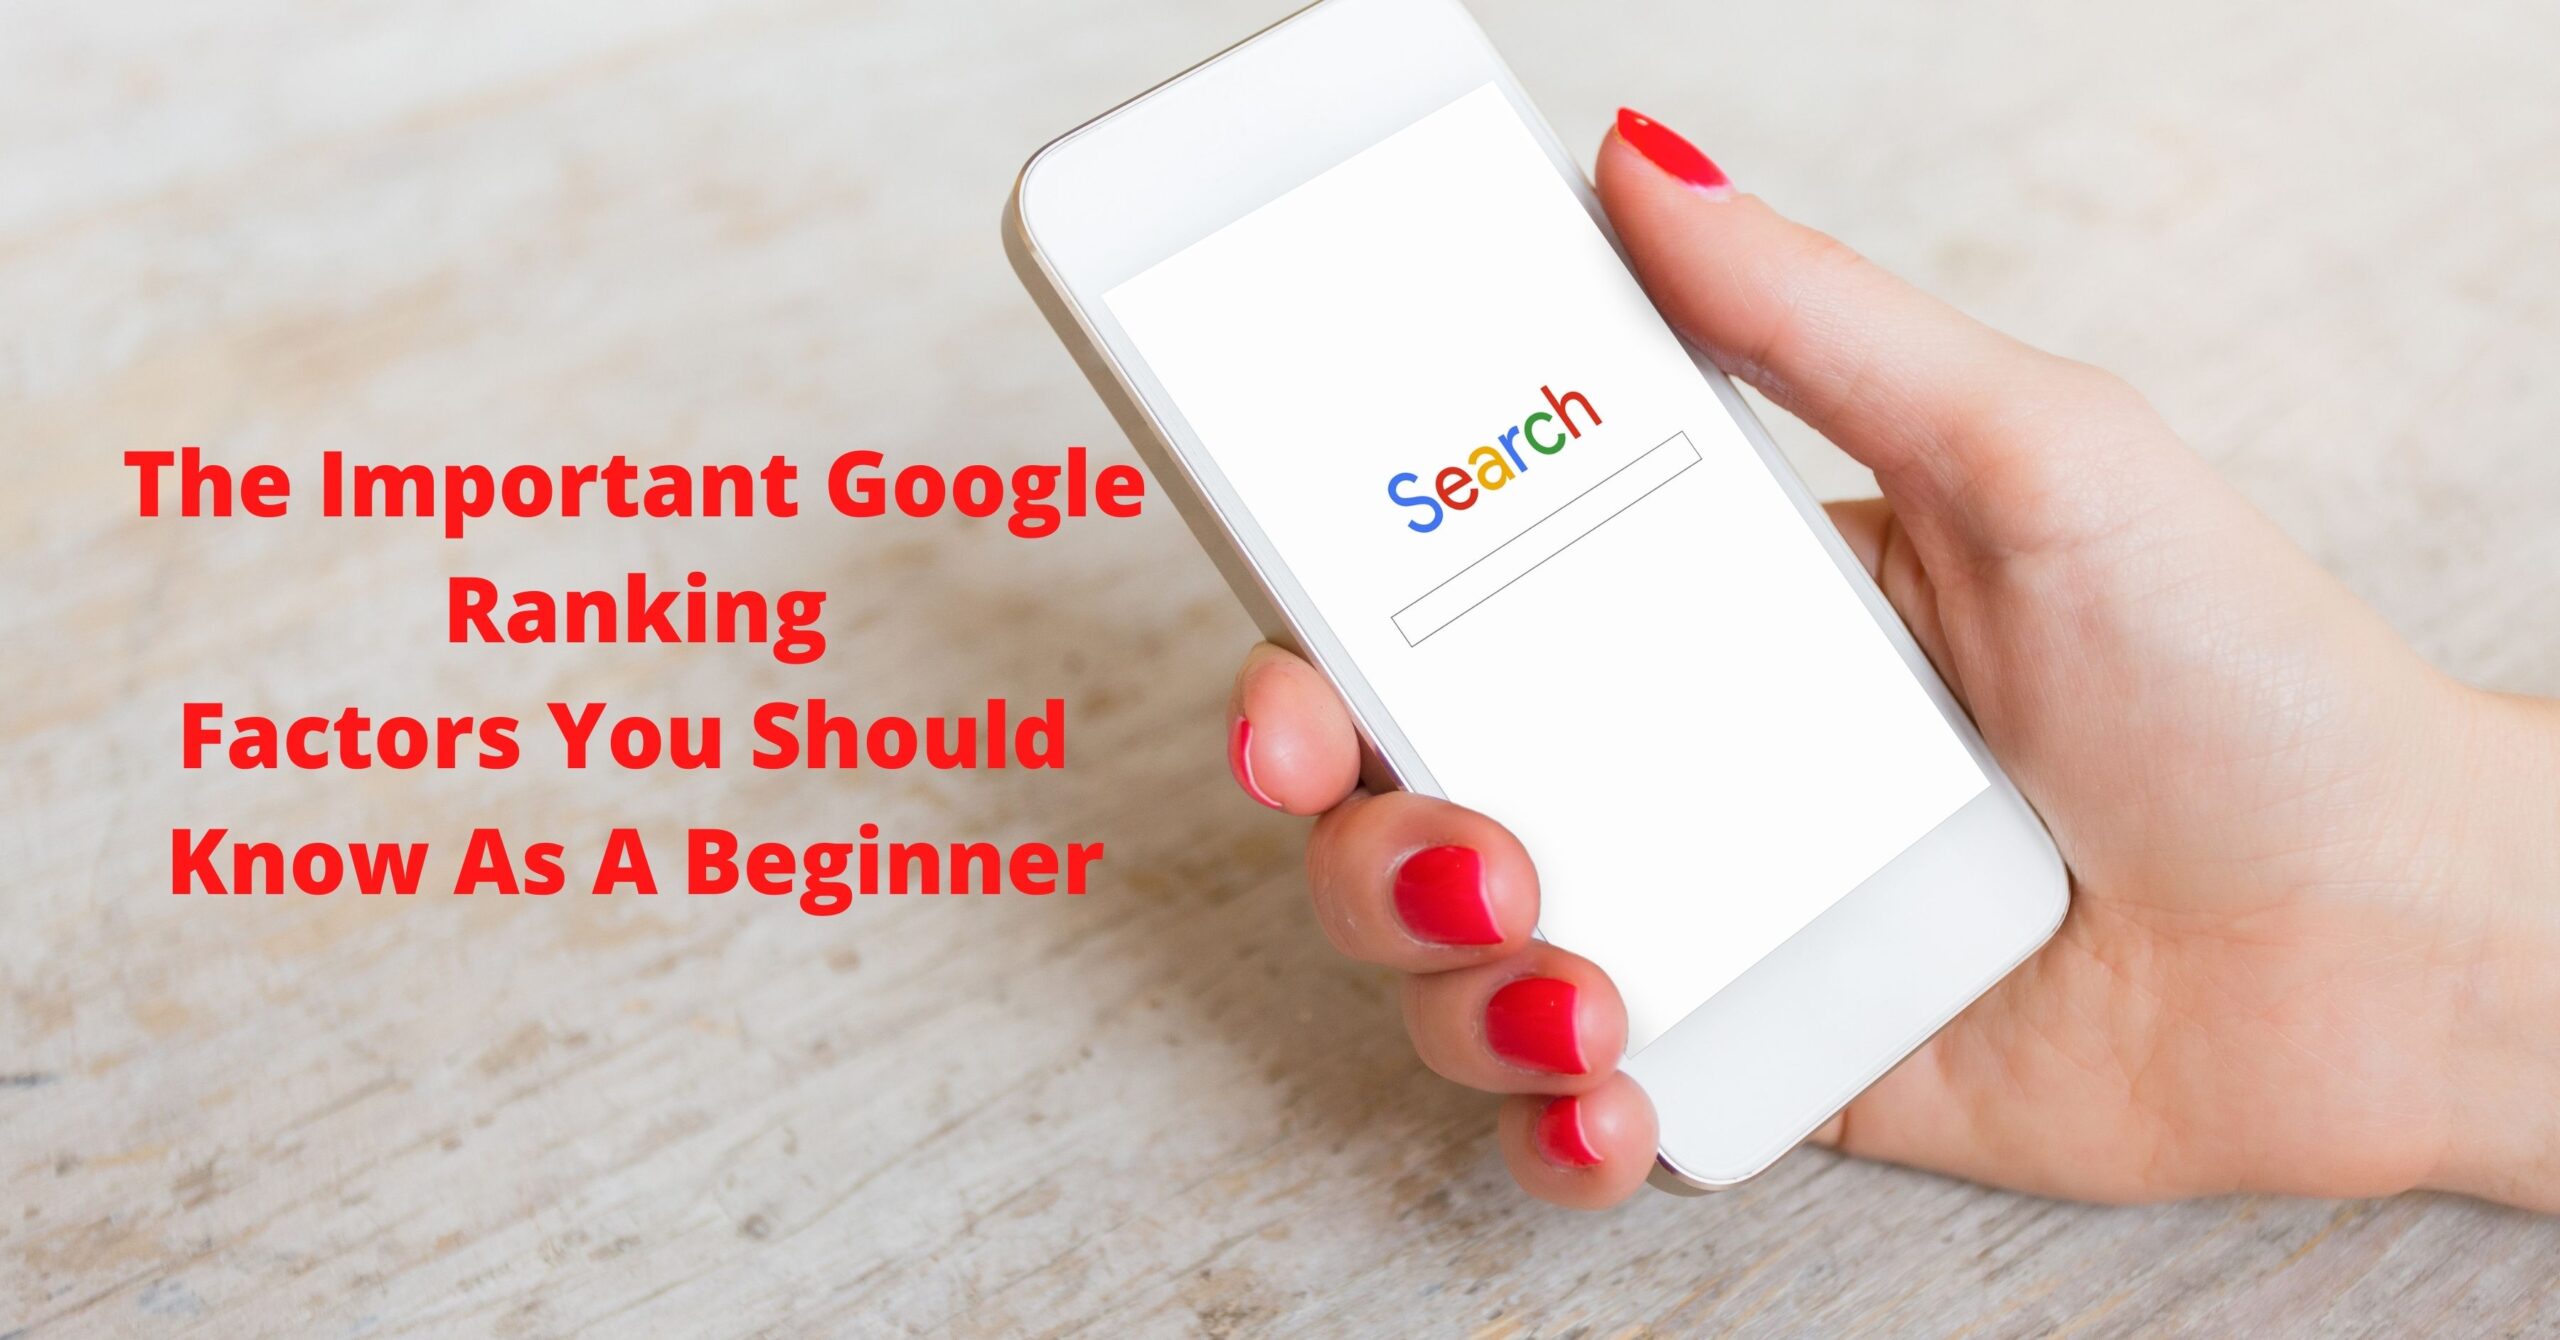 Some Of The Important Google Ranking Factors You Should Know As A Beginner